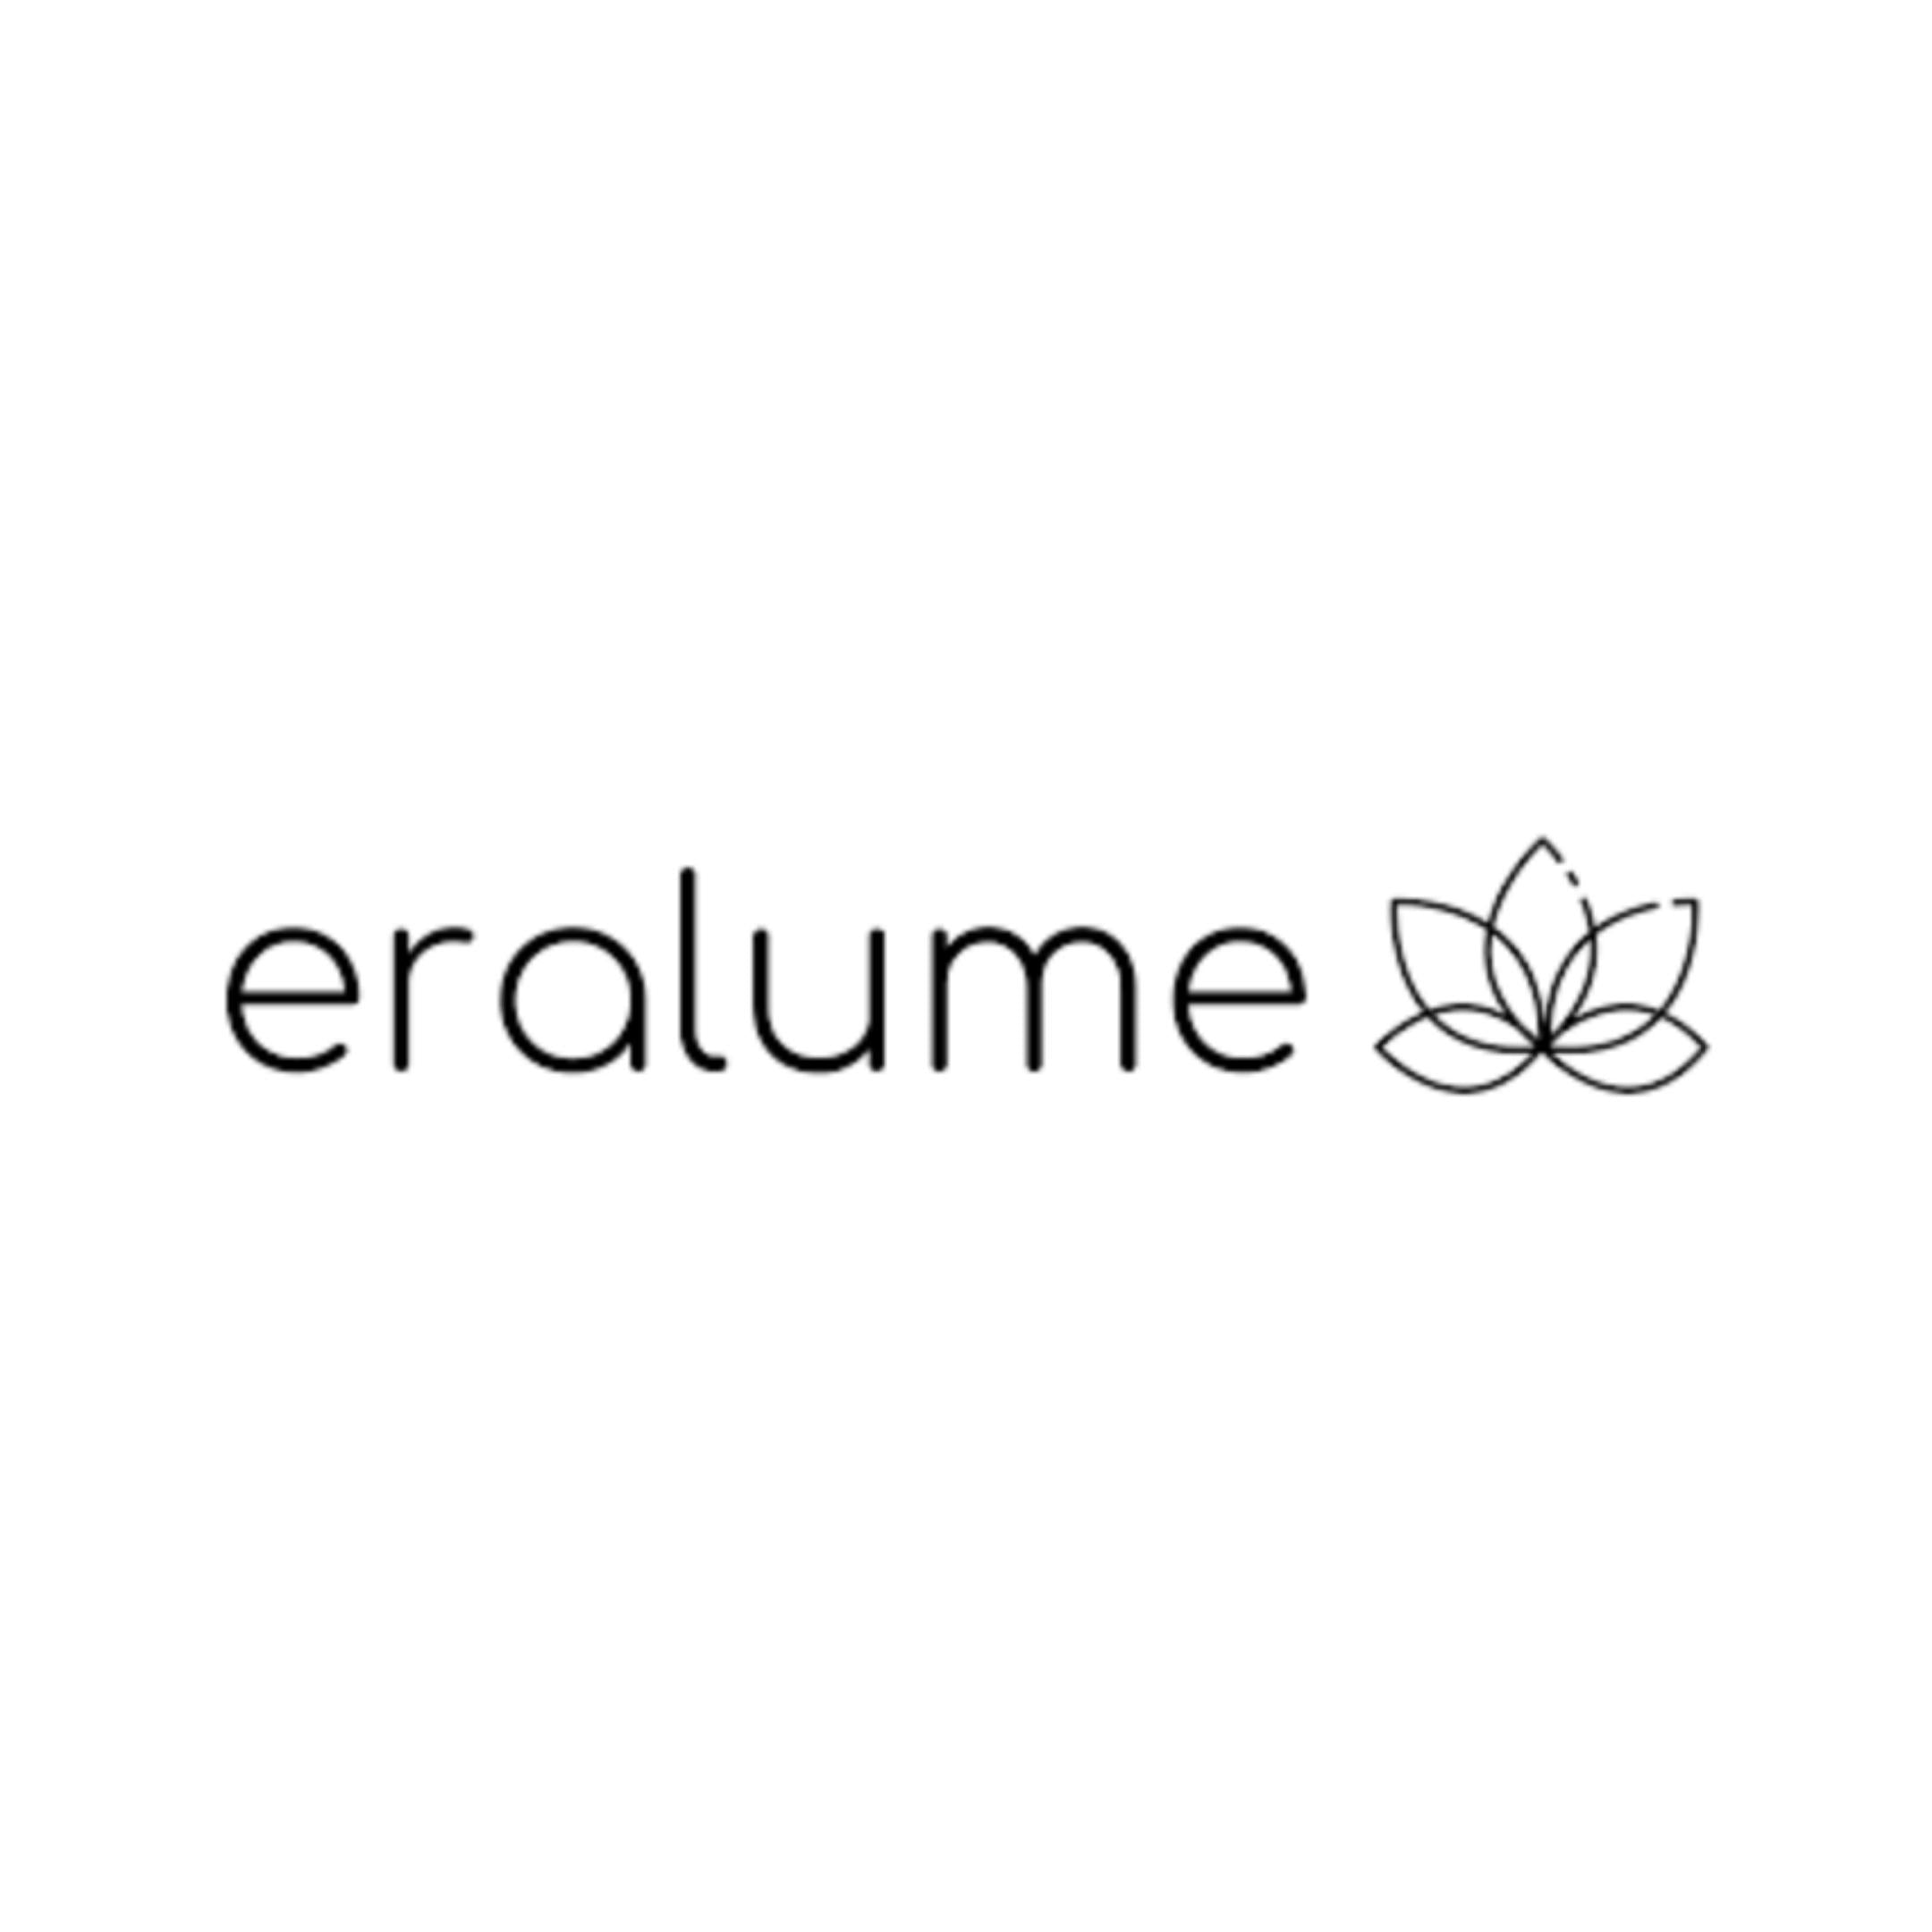 Eralume | Pretty by Her